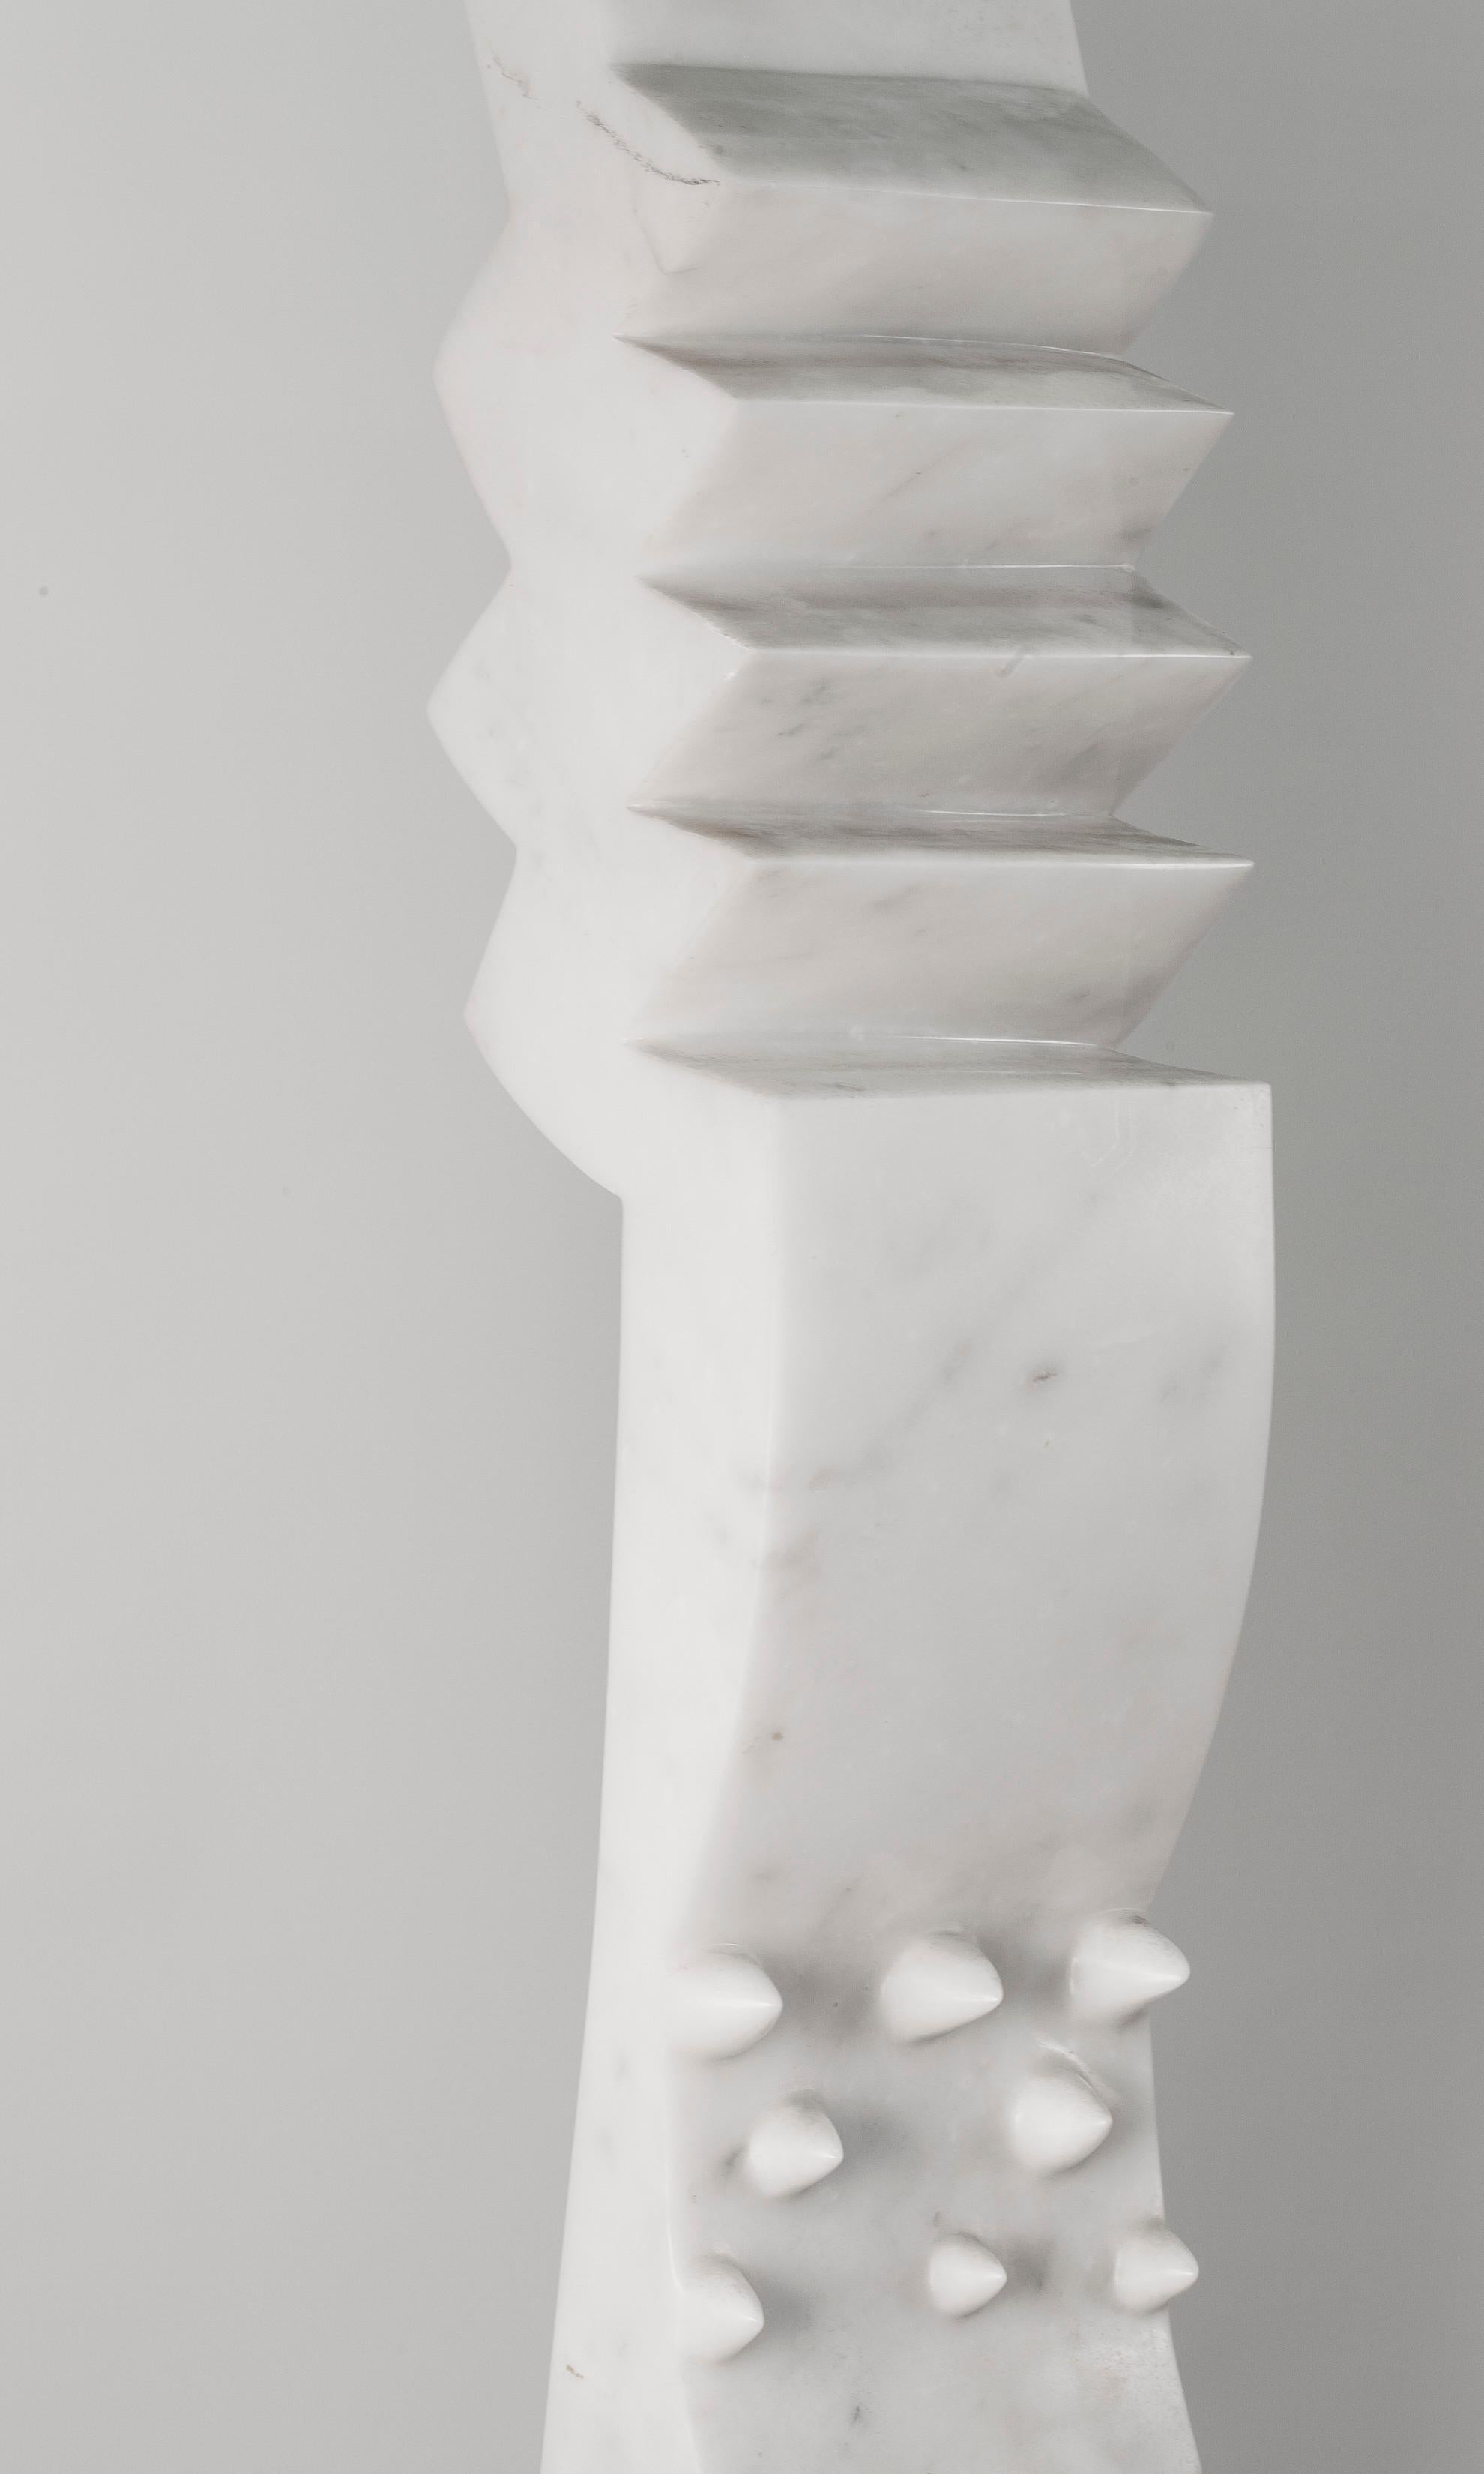 Born in Port-au-Prince, Haiti, but based in Italy, sculptor Tristian Cassamajor incorporates African themes into his remarkable, monumental marble and granite sculptures. This beautiful, knife-like composition in white marble is studded, bent and